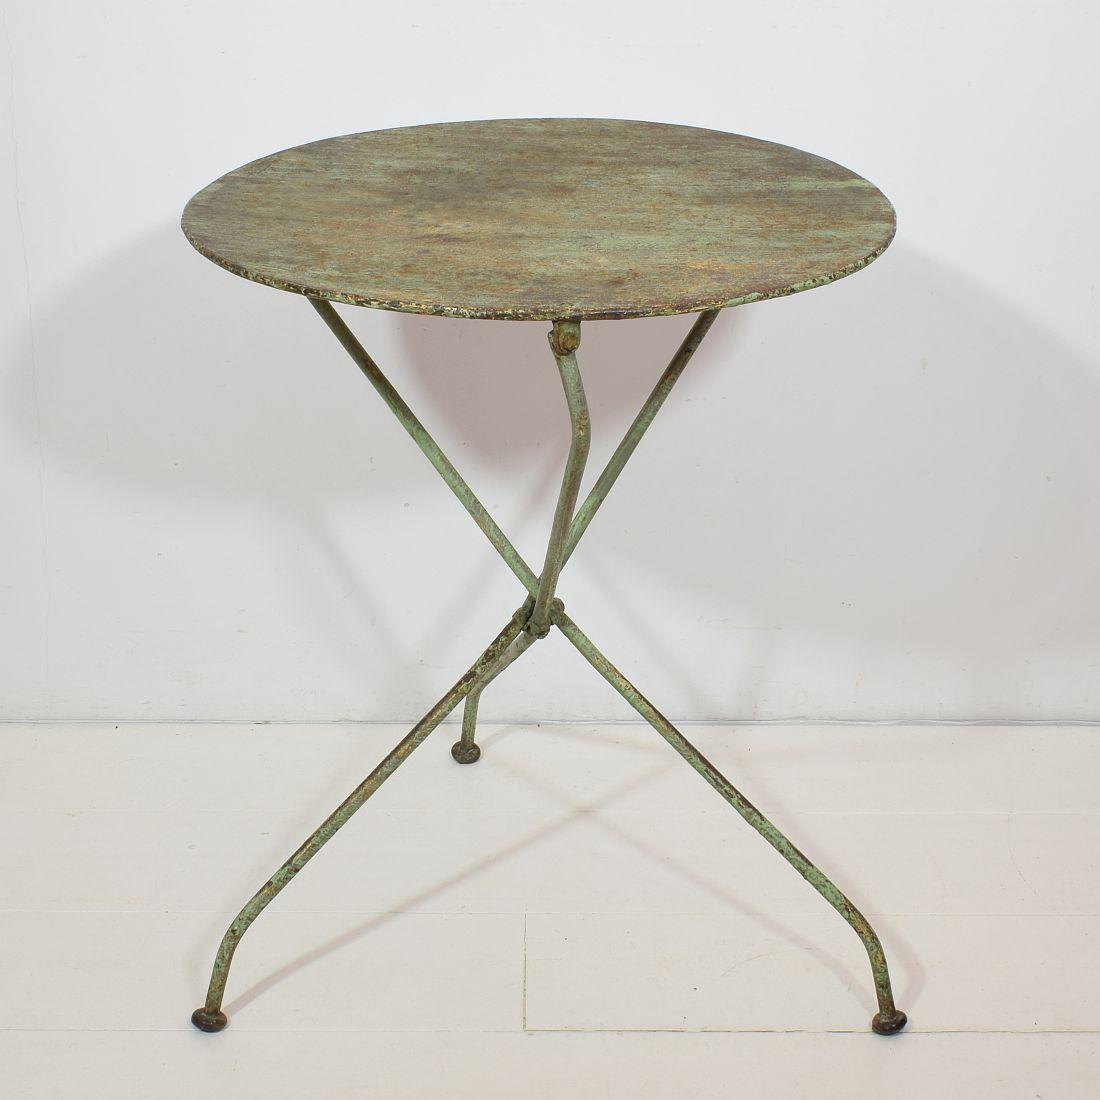 Belle Époque 19th Century French Iron Bistro Folding Table